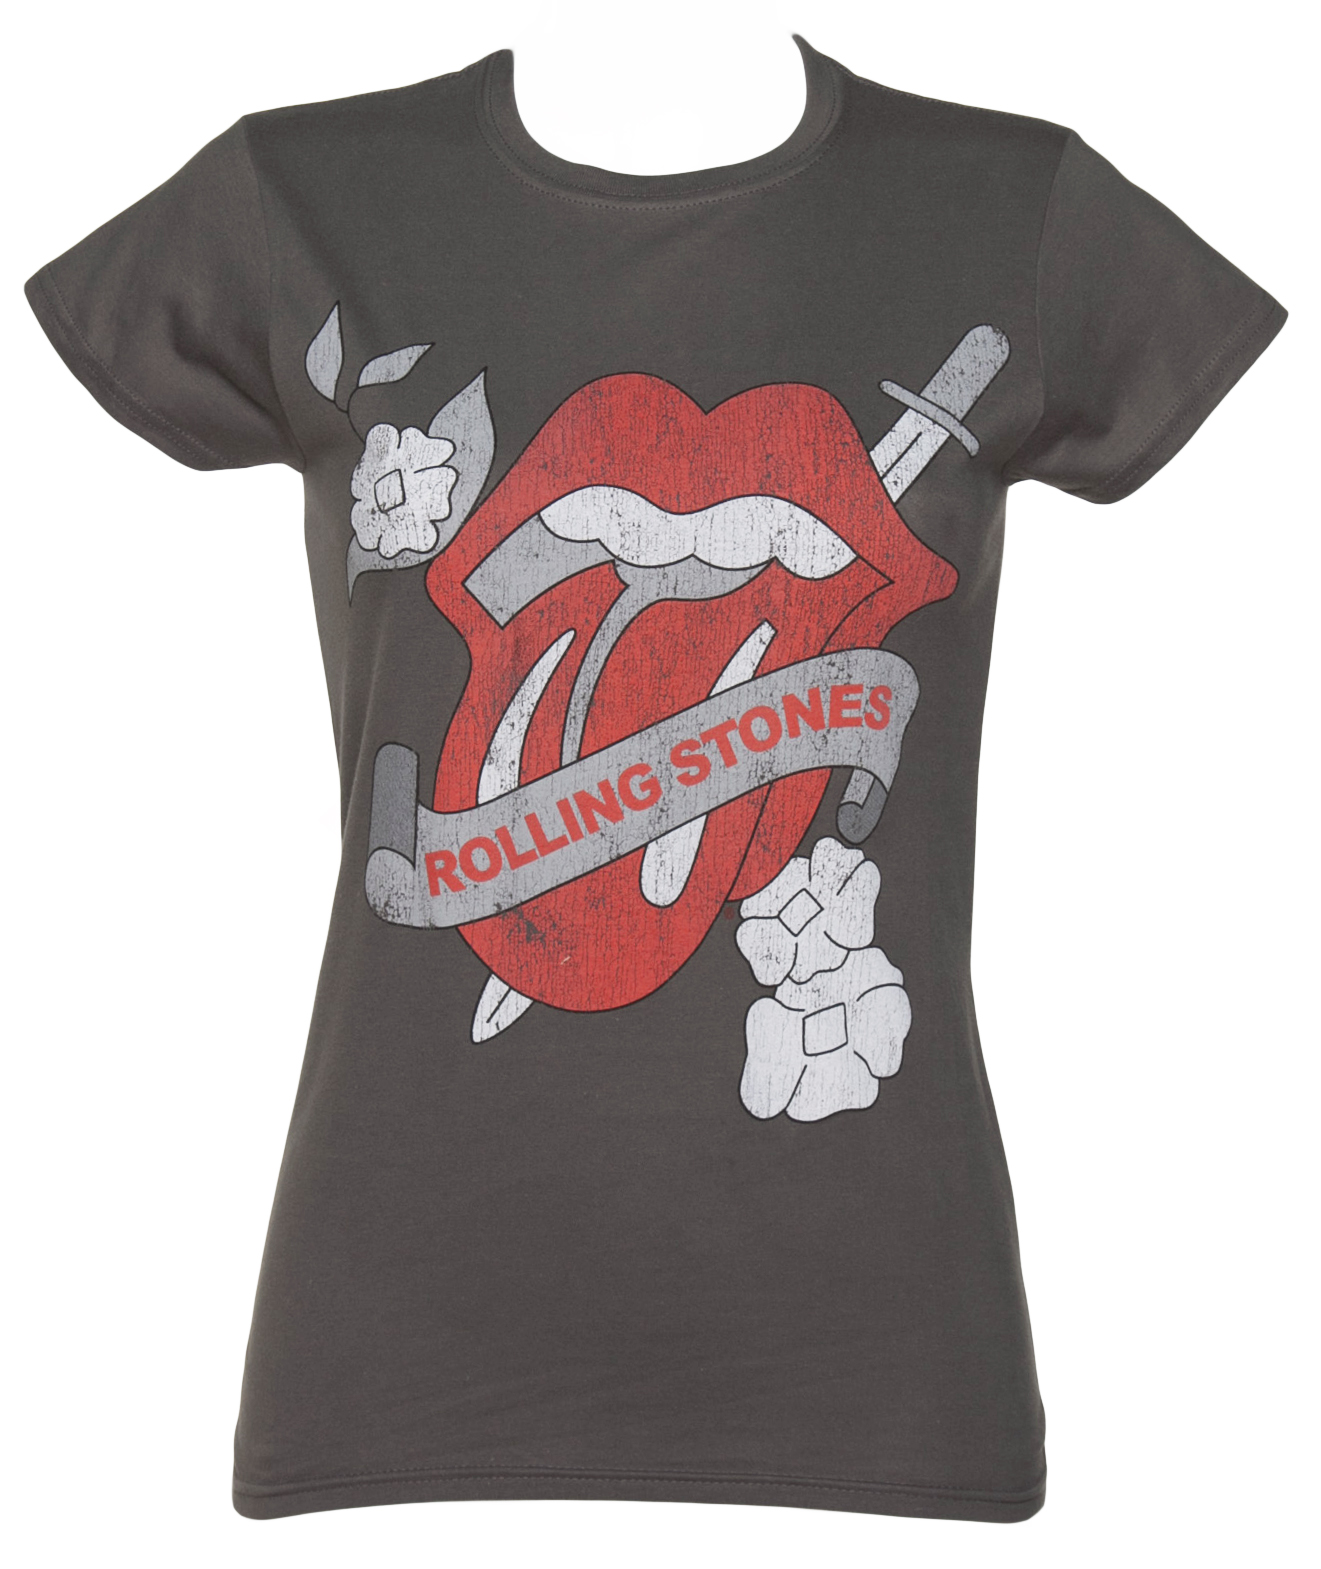 Charcoal Vintage Tattoo Rolling Stones